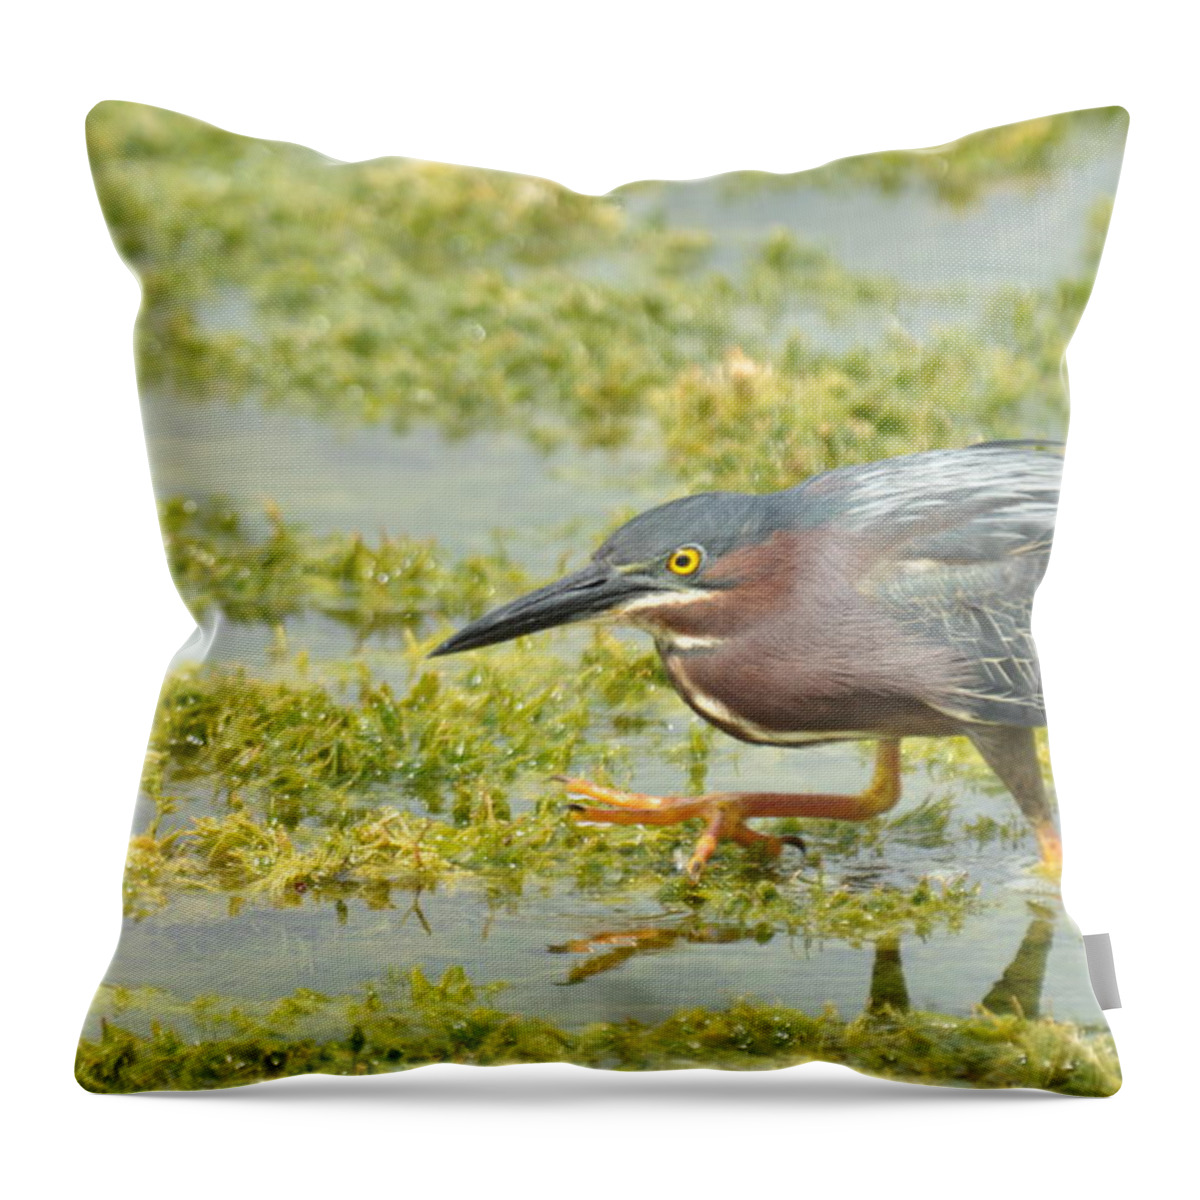 Green Throw Pillow featuring the photograph Stepping Out by Frank Madia